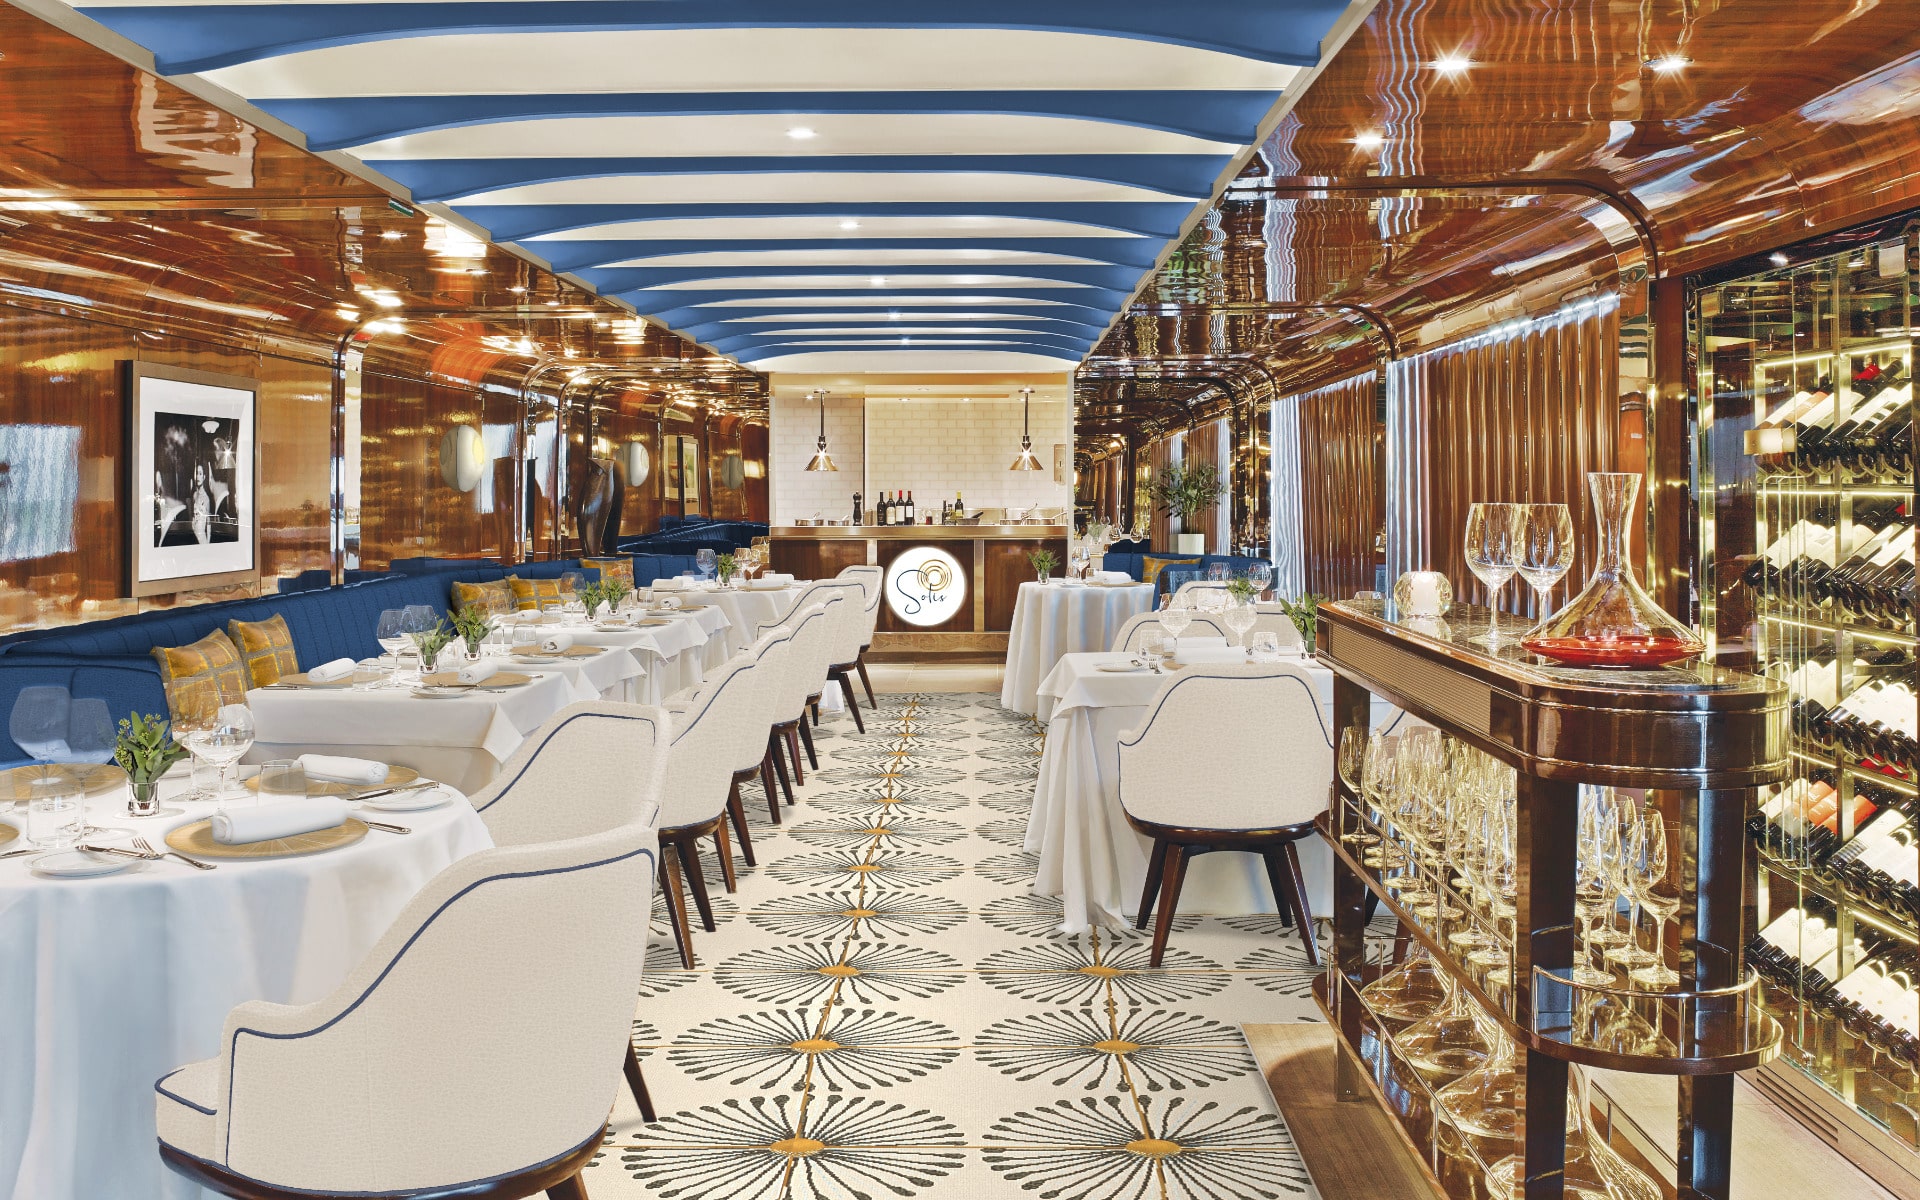 The new Solis Restaurant on Seabourn Quest (rendering).